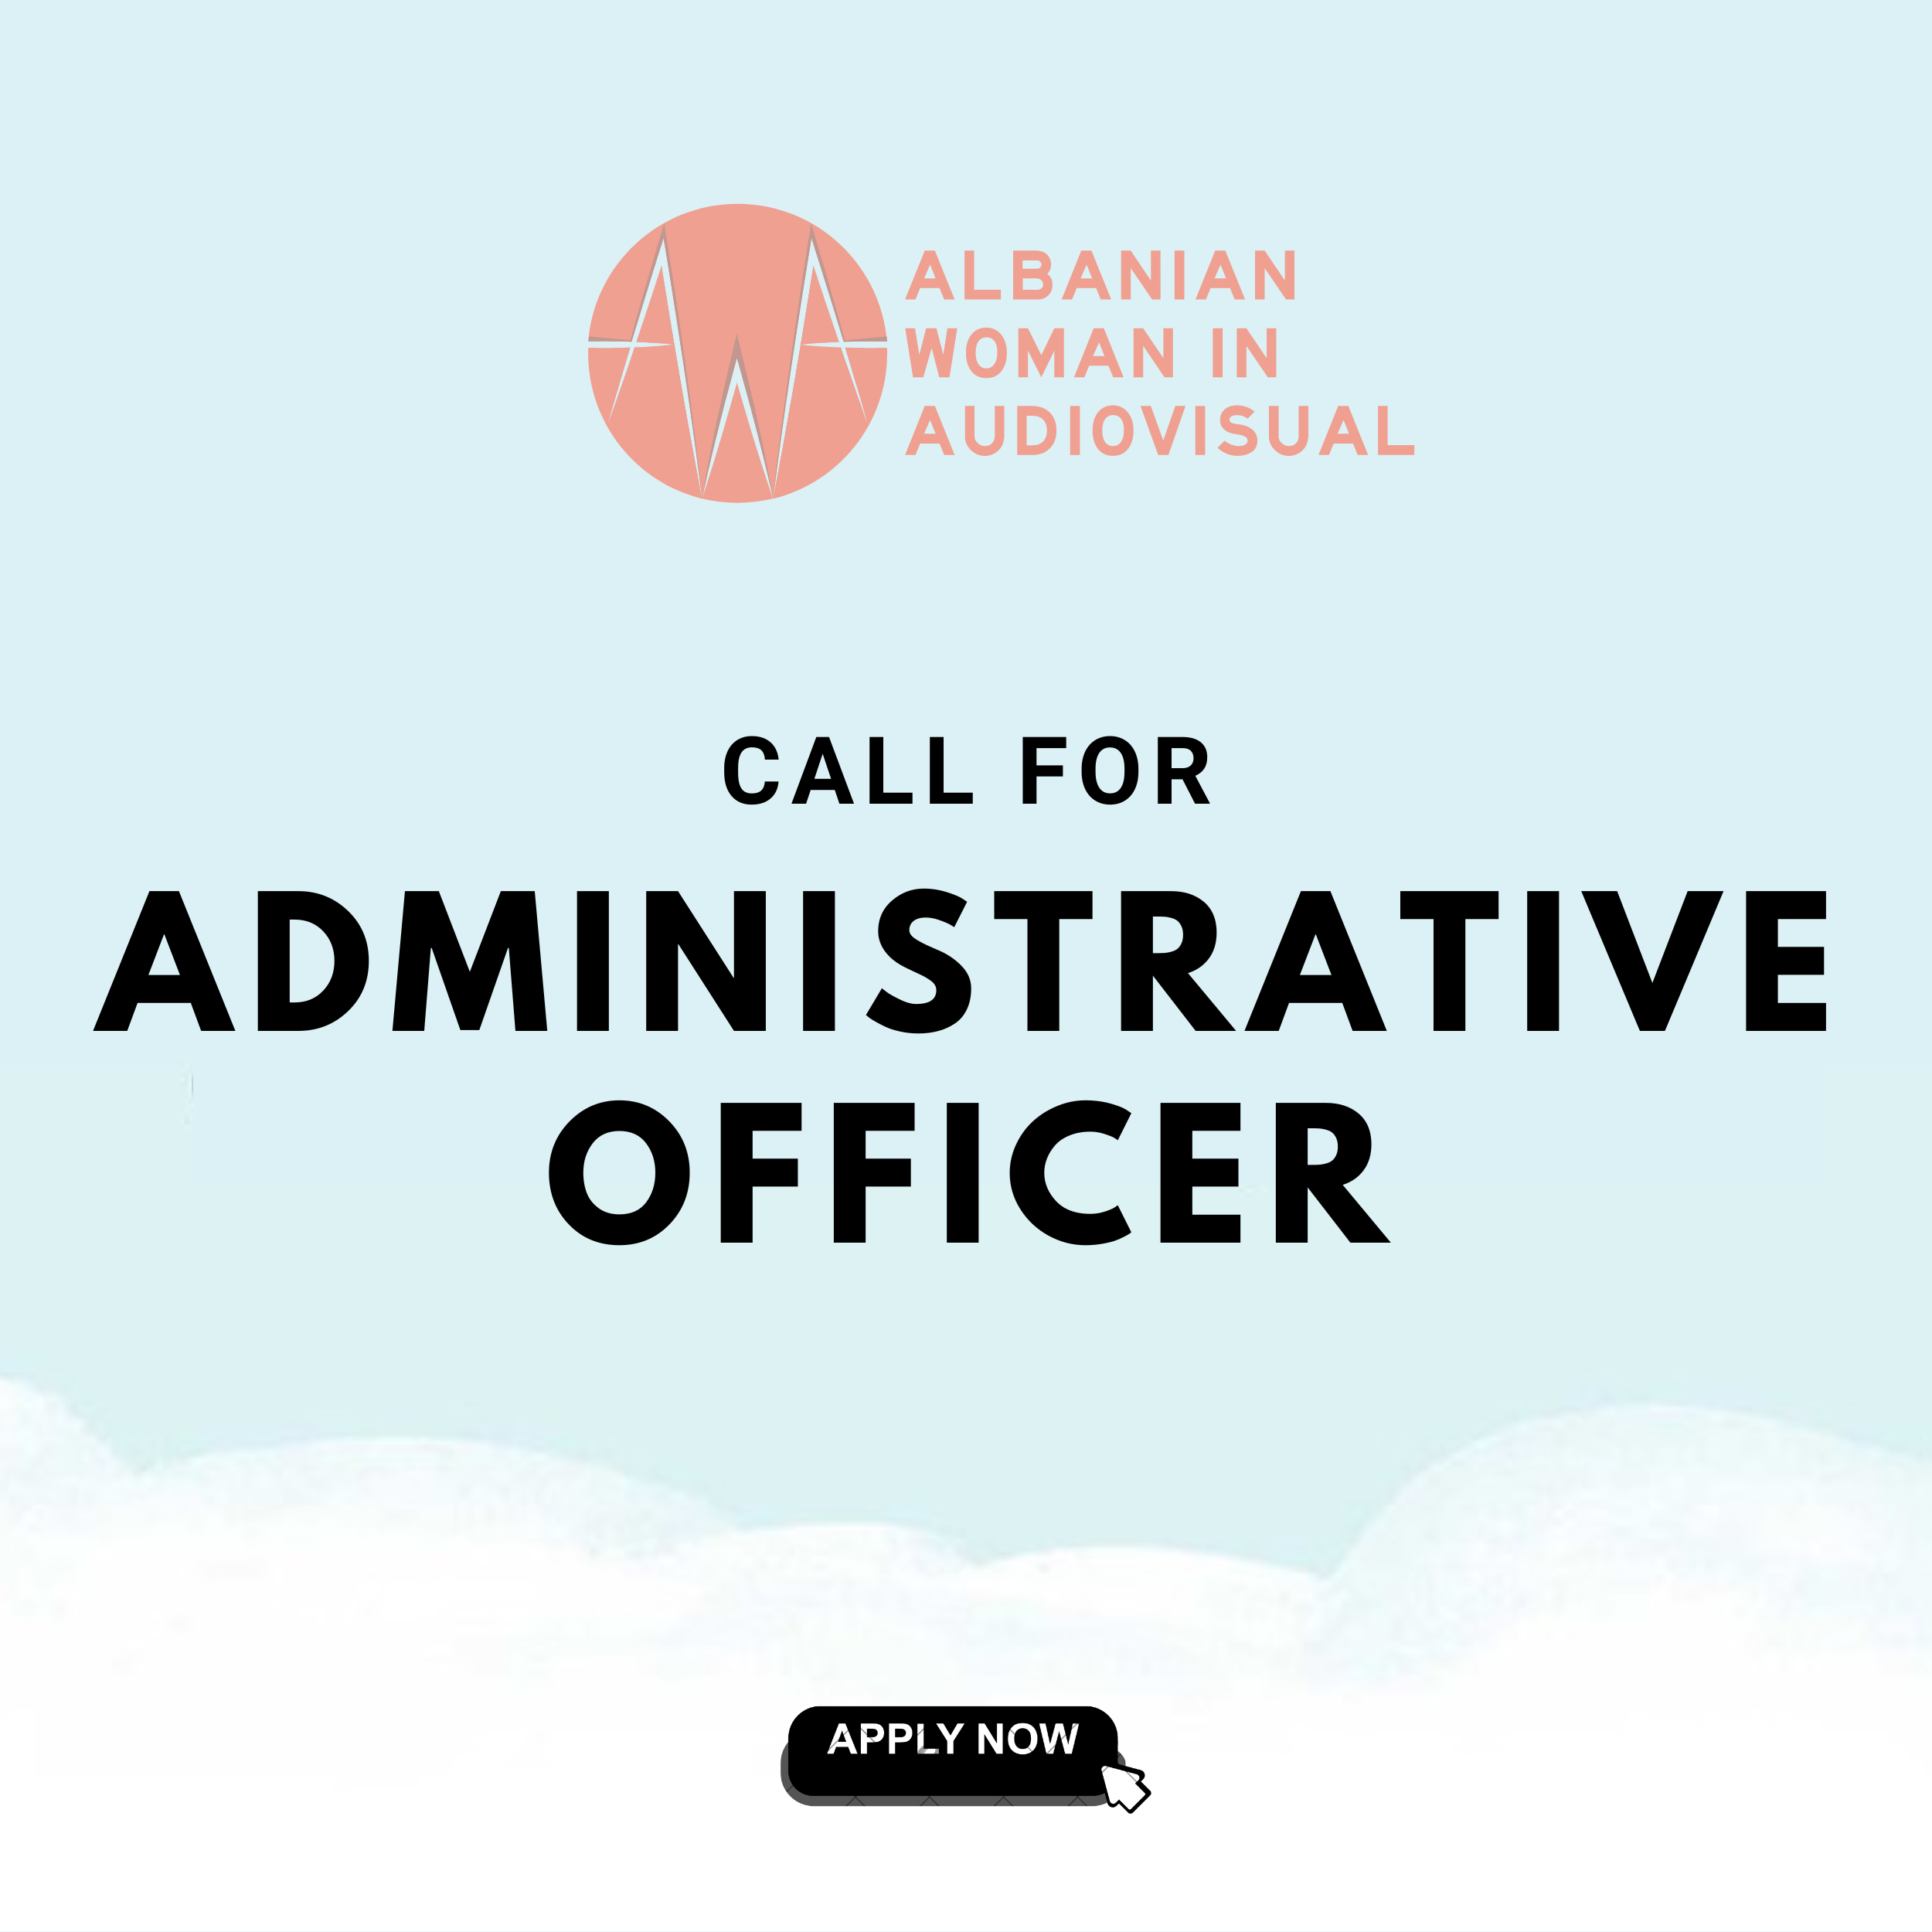 Call for Administrative Officer